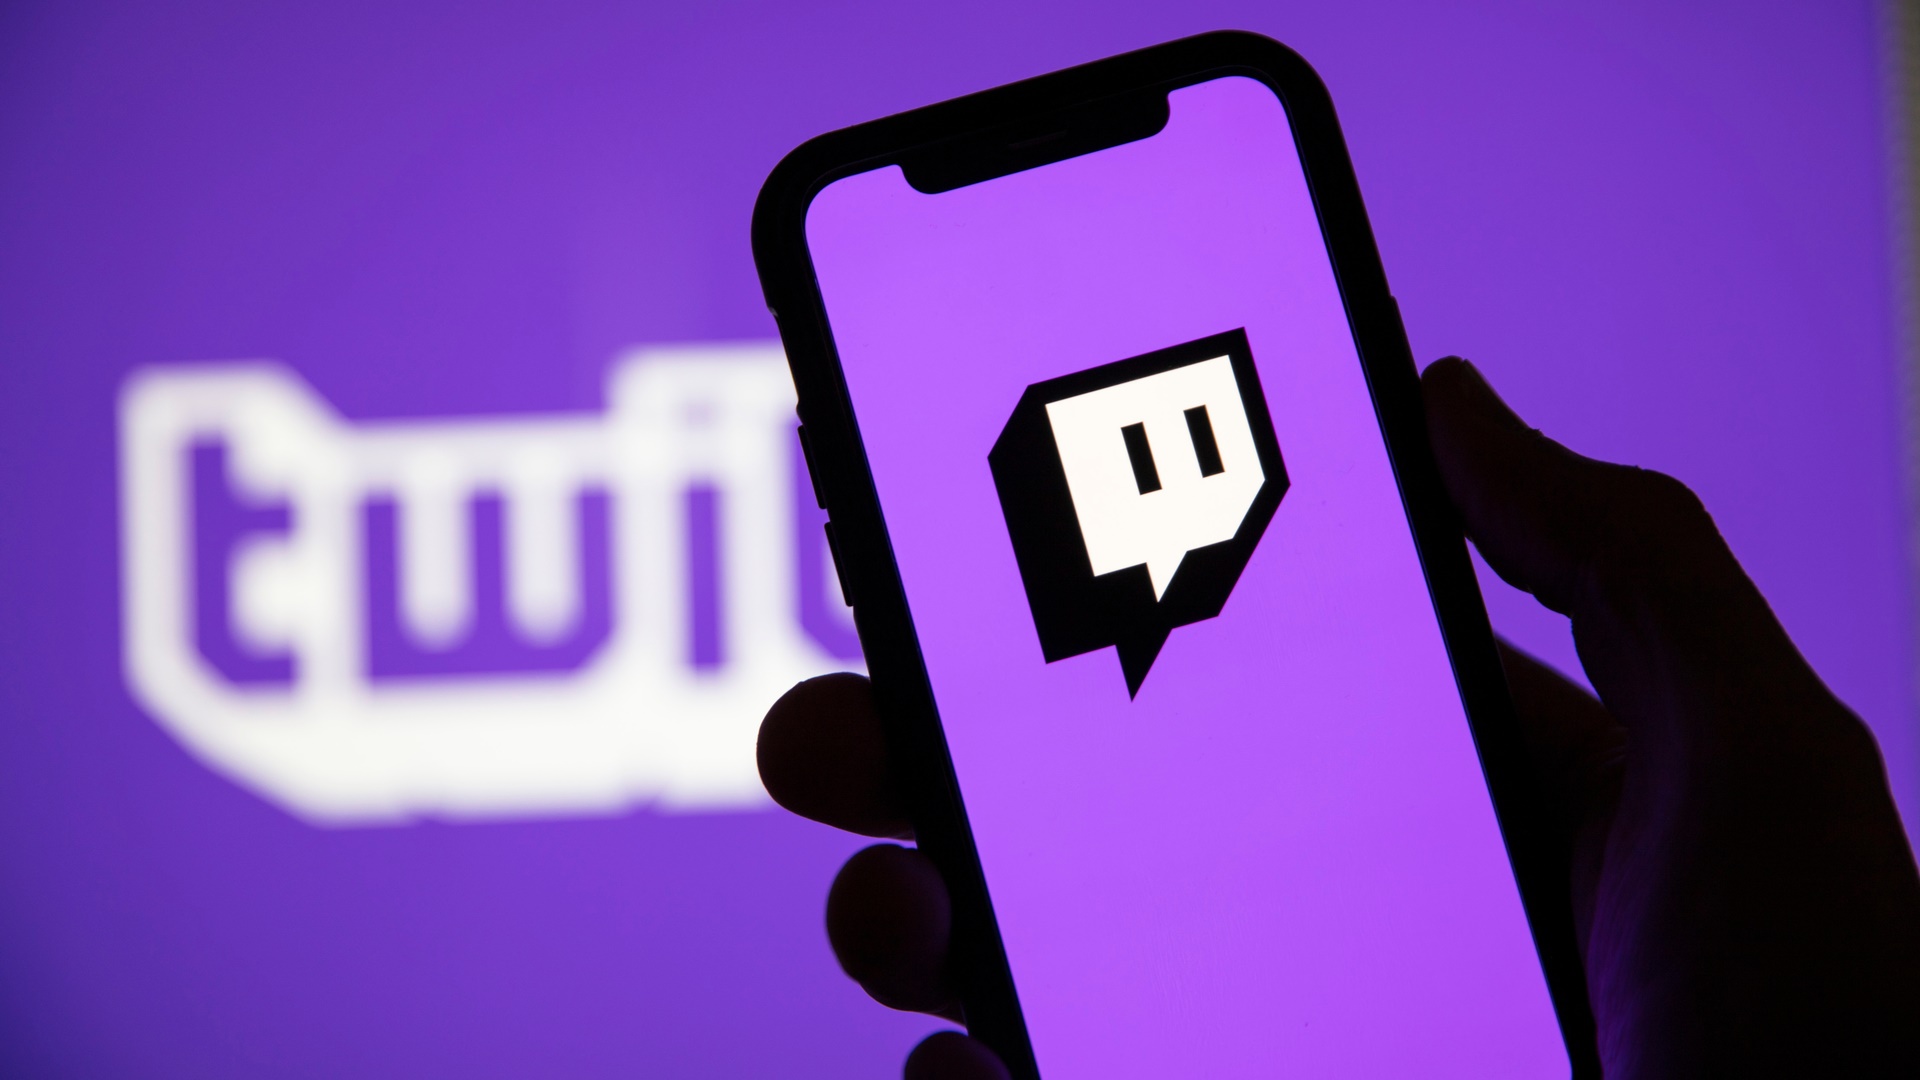 What Is Twitch?